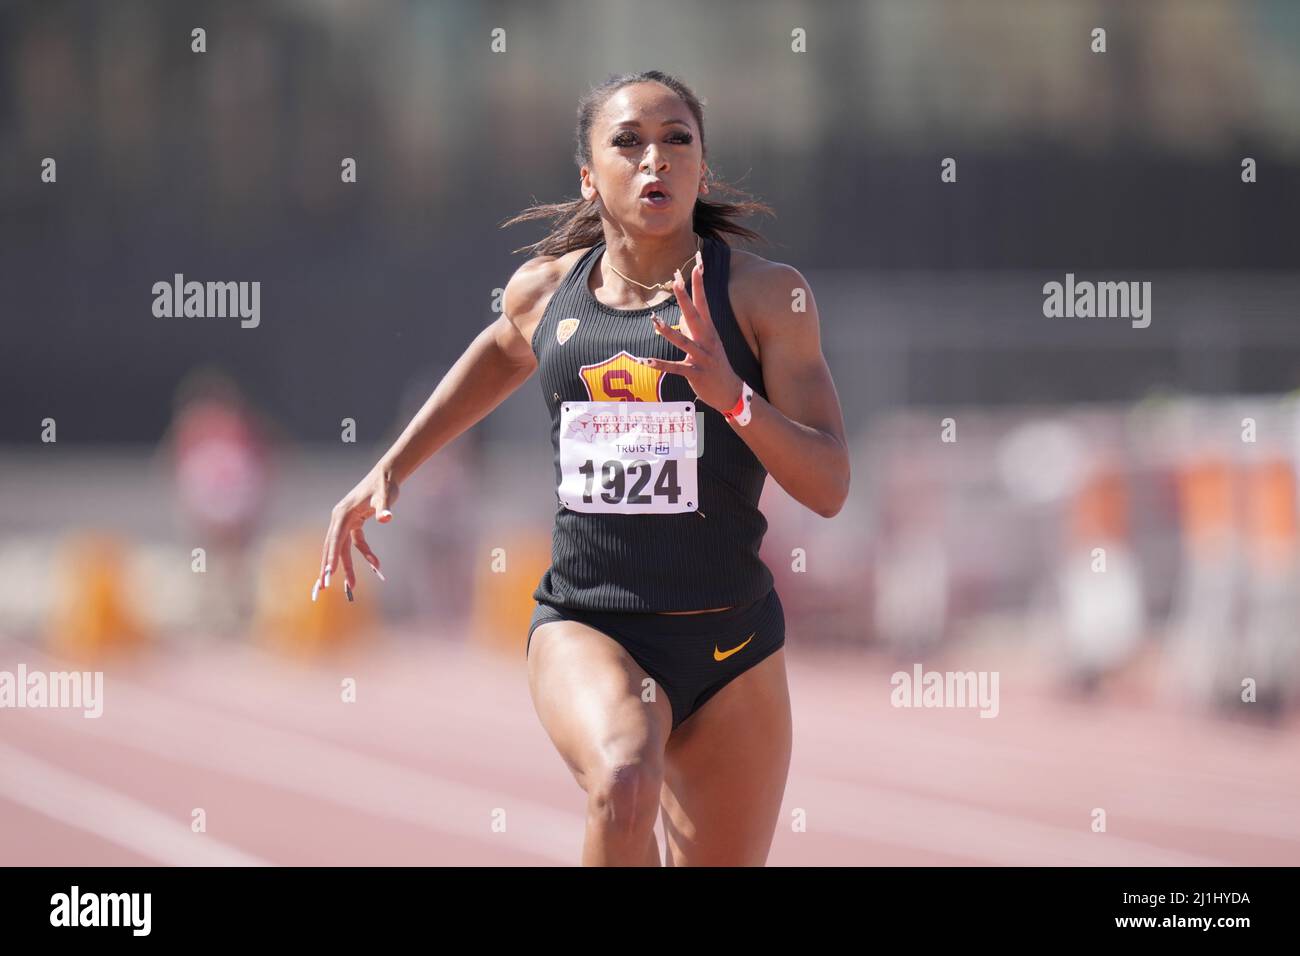 Celera Barnes wins womens 100m heat in 11.07 for the top qualifying time during the 94th Clyde Littlefield Texas Relays, Friday, Mar 25, 2022, in Austin